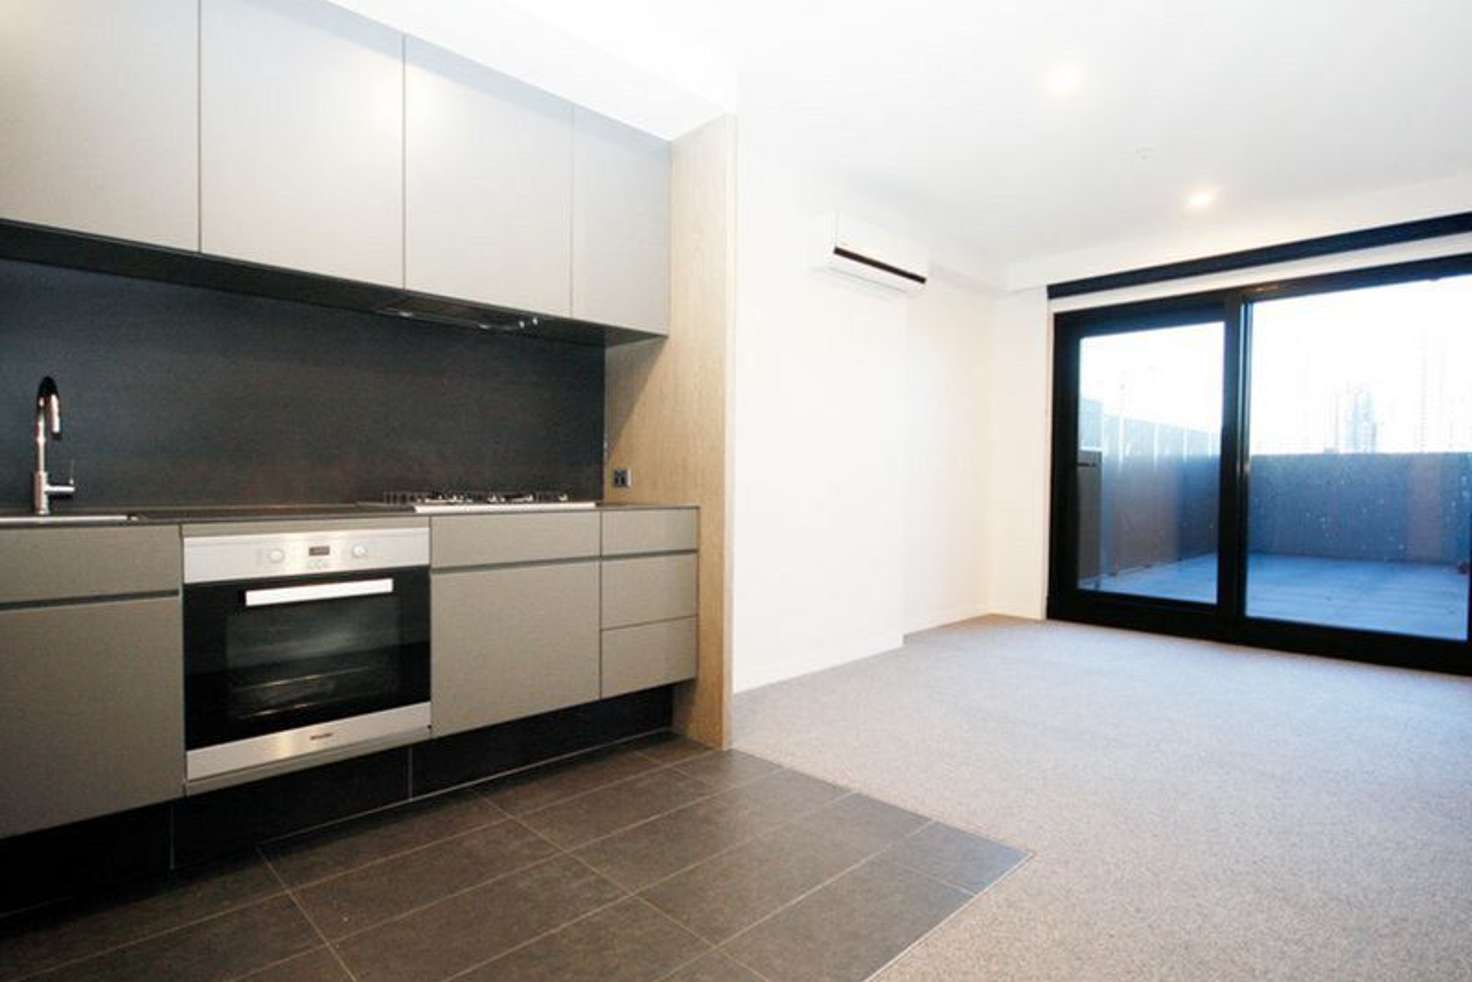 Main view of Homely apartment listing, 413/6-22 Pearl River Road, Docklands VIC 3008